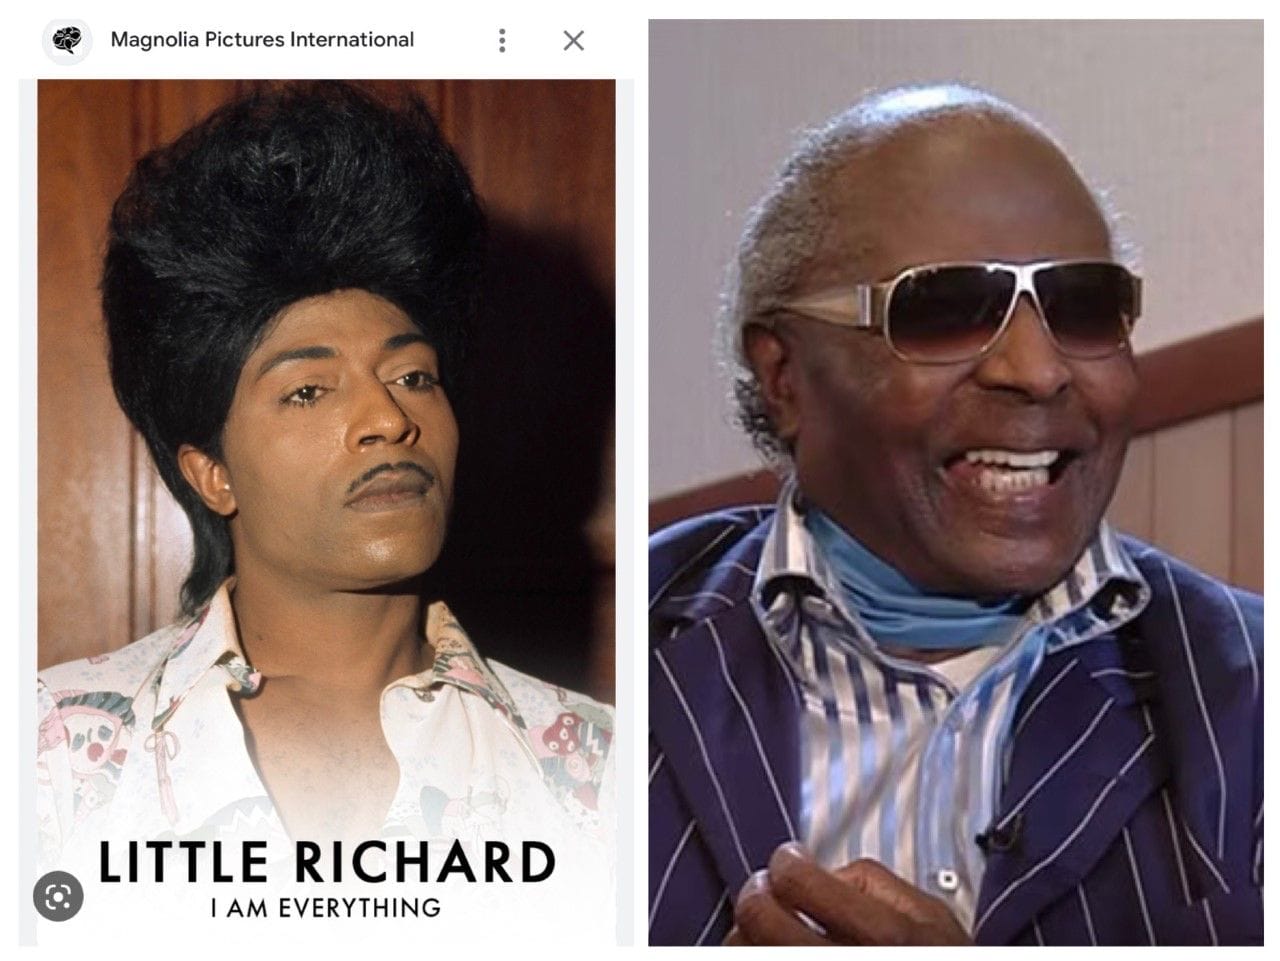 THE DOCUMENTARY COVER art and Little Richard in later years, before his death in 2020.